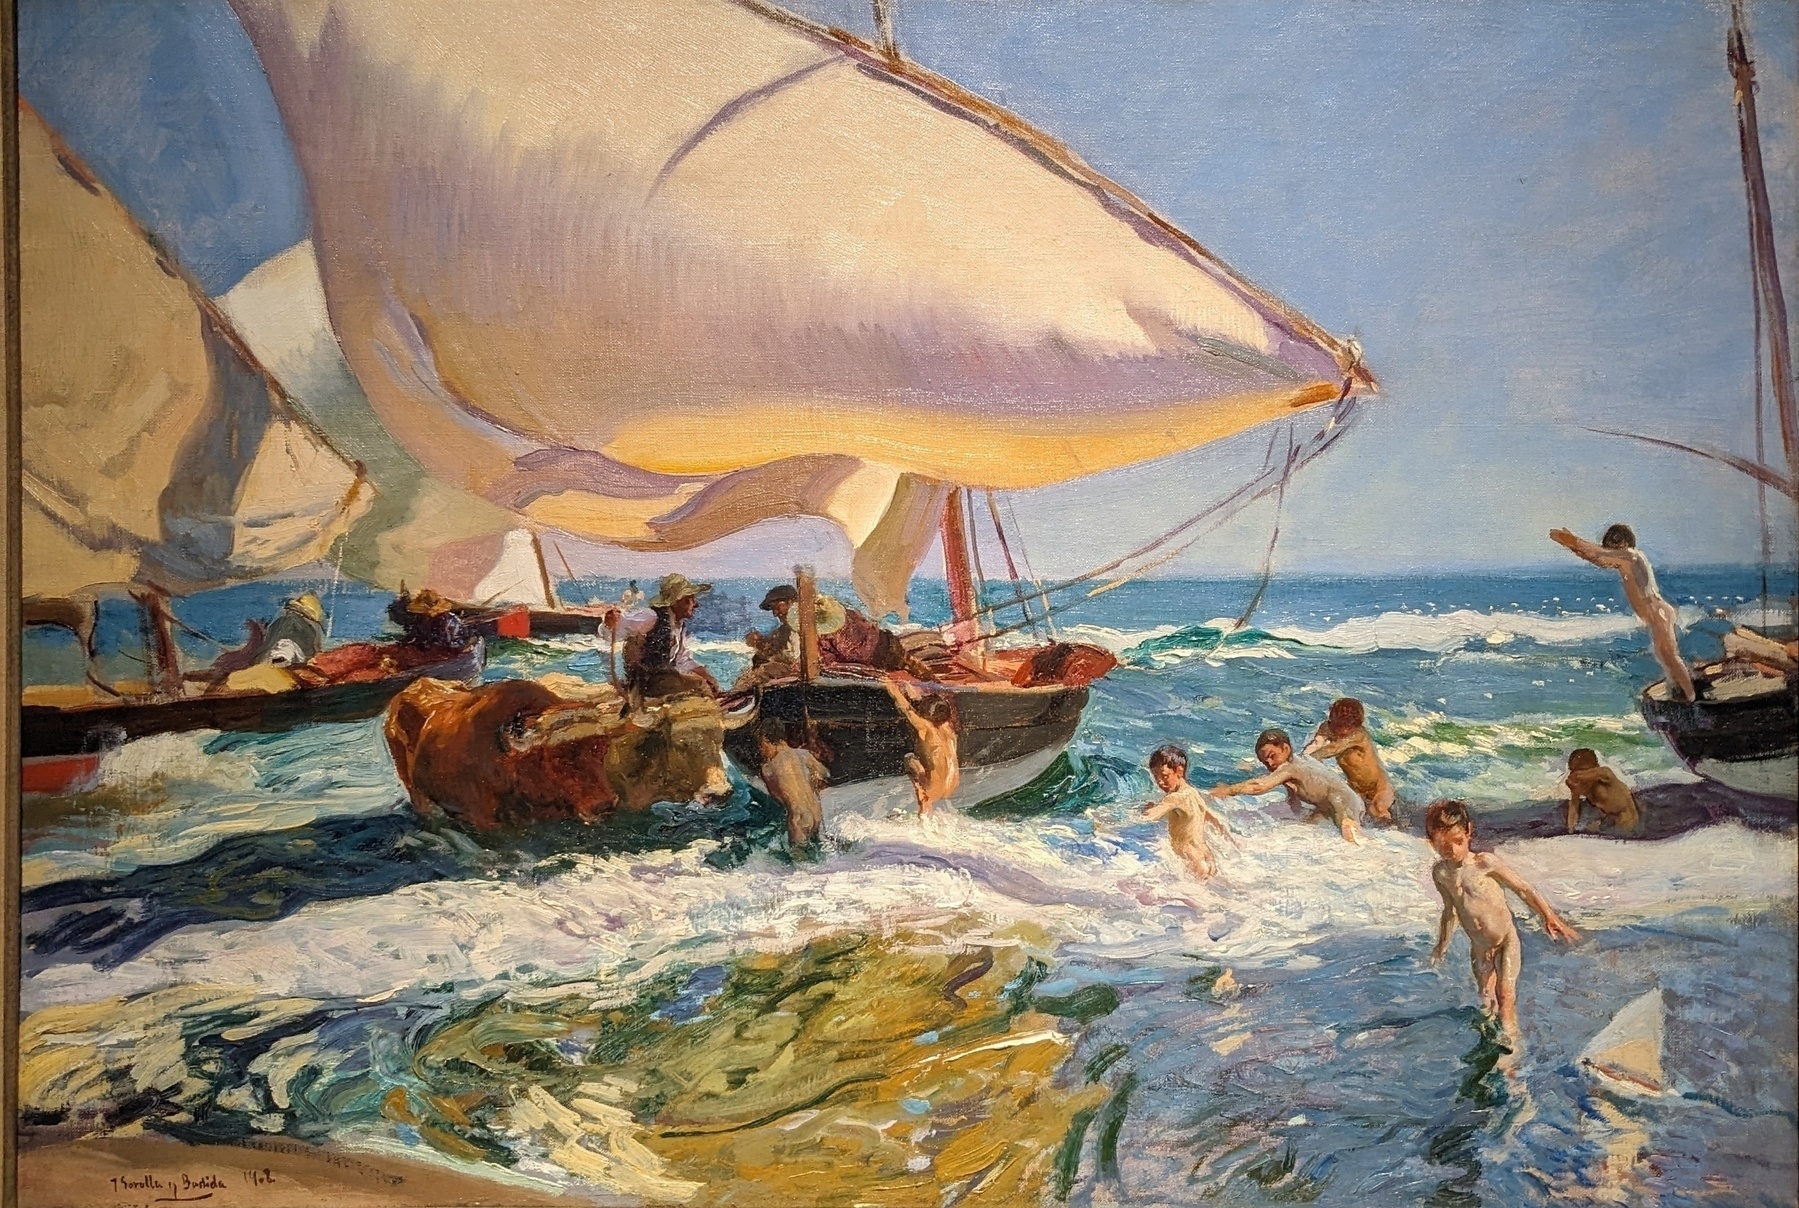 Oil painting - seashore with a small boat with a billowing sail and small naked children playing in the waves